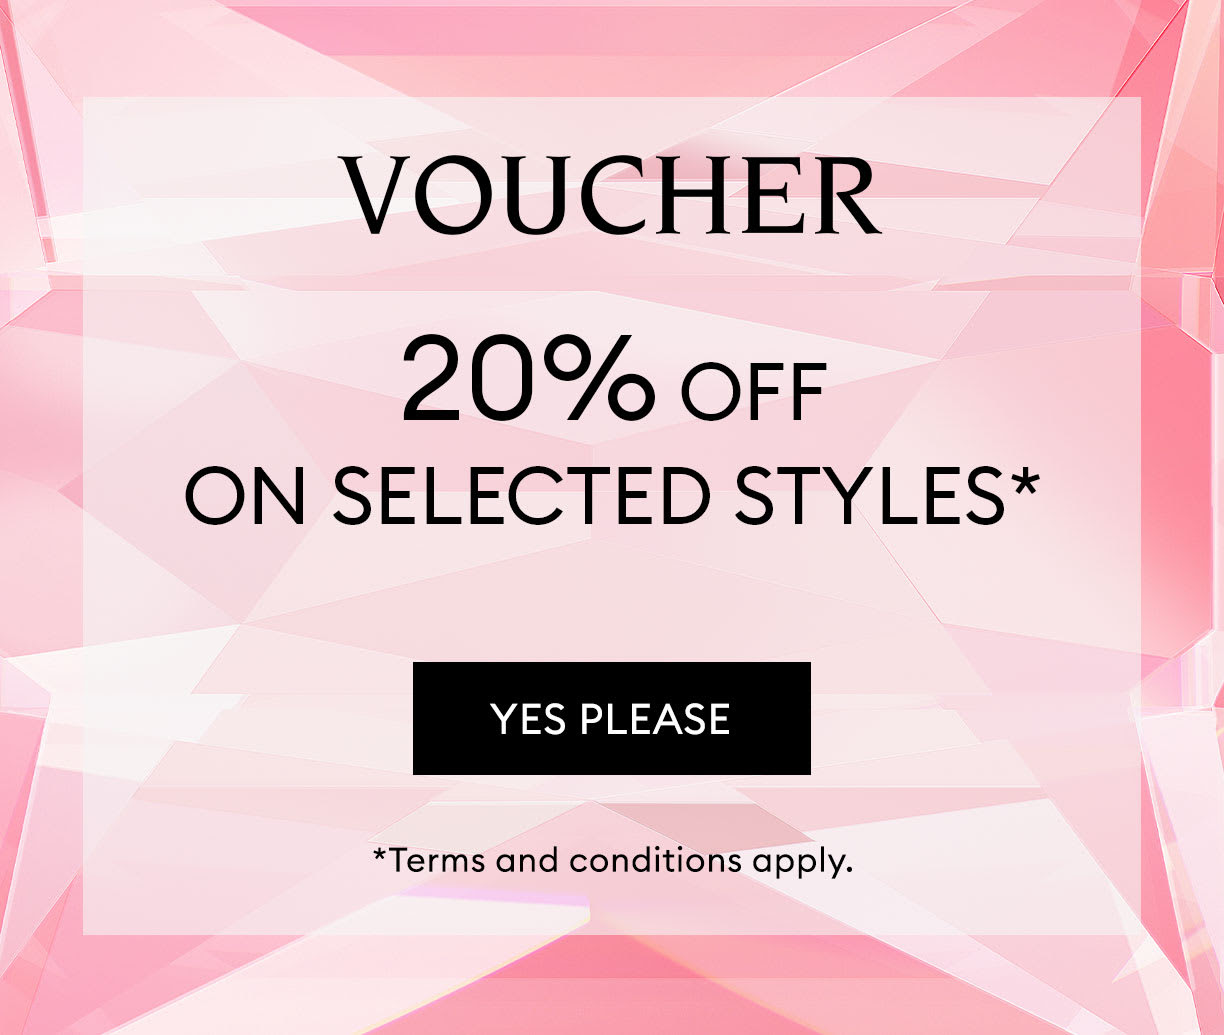 Shh, get extra 20% off with Swarovski voucher code. In store and online